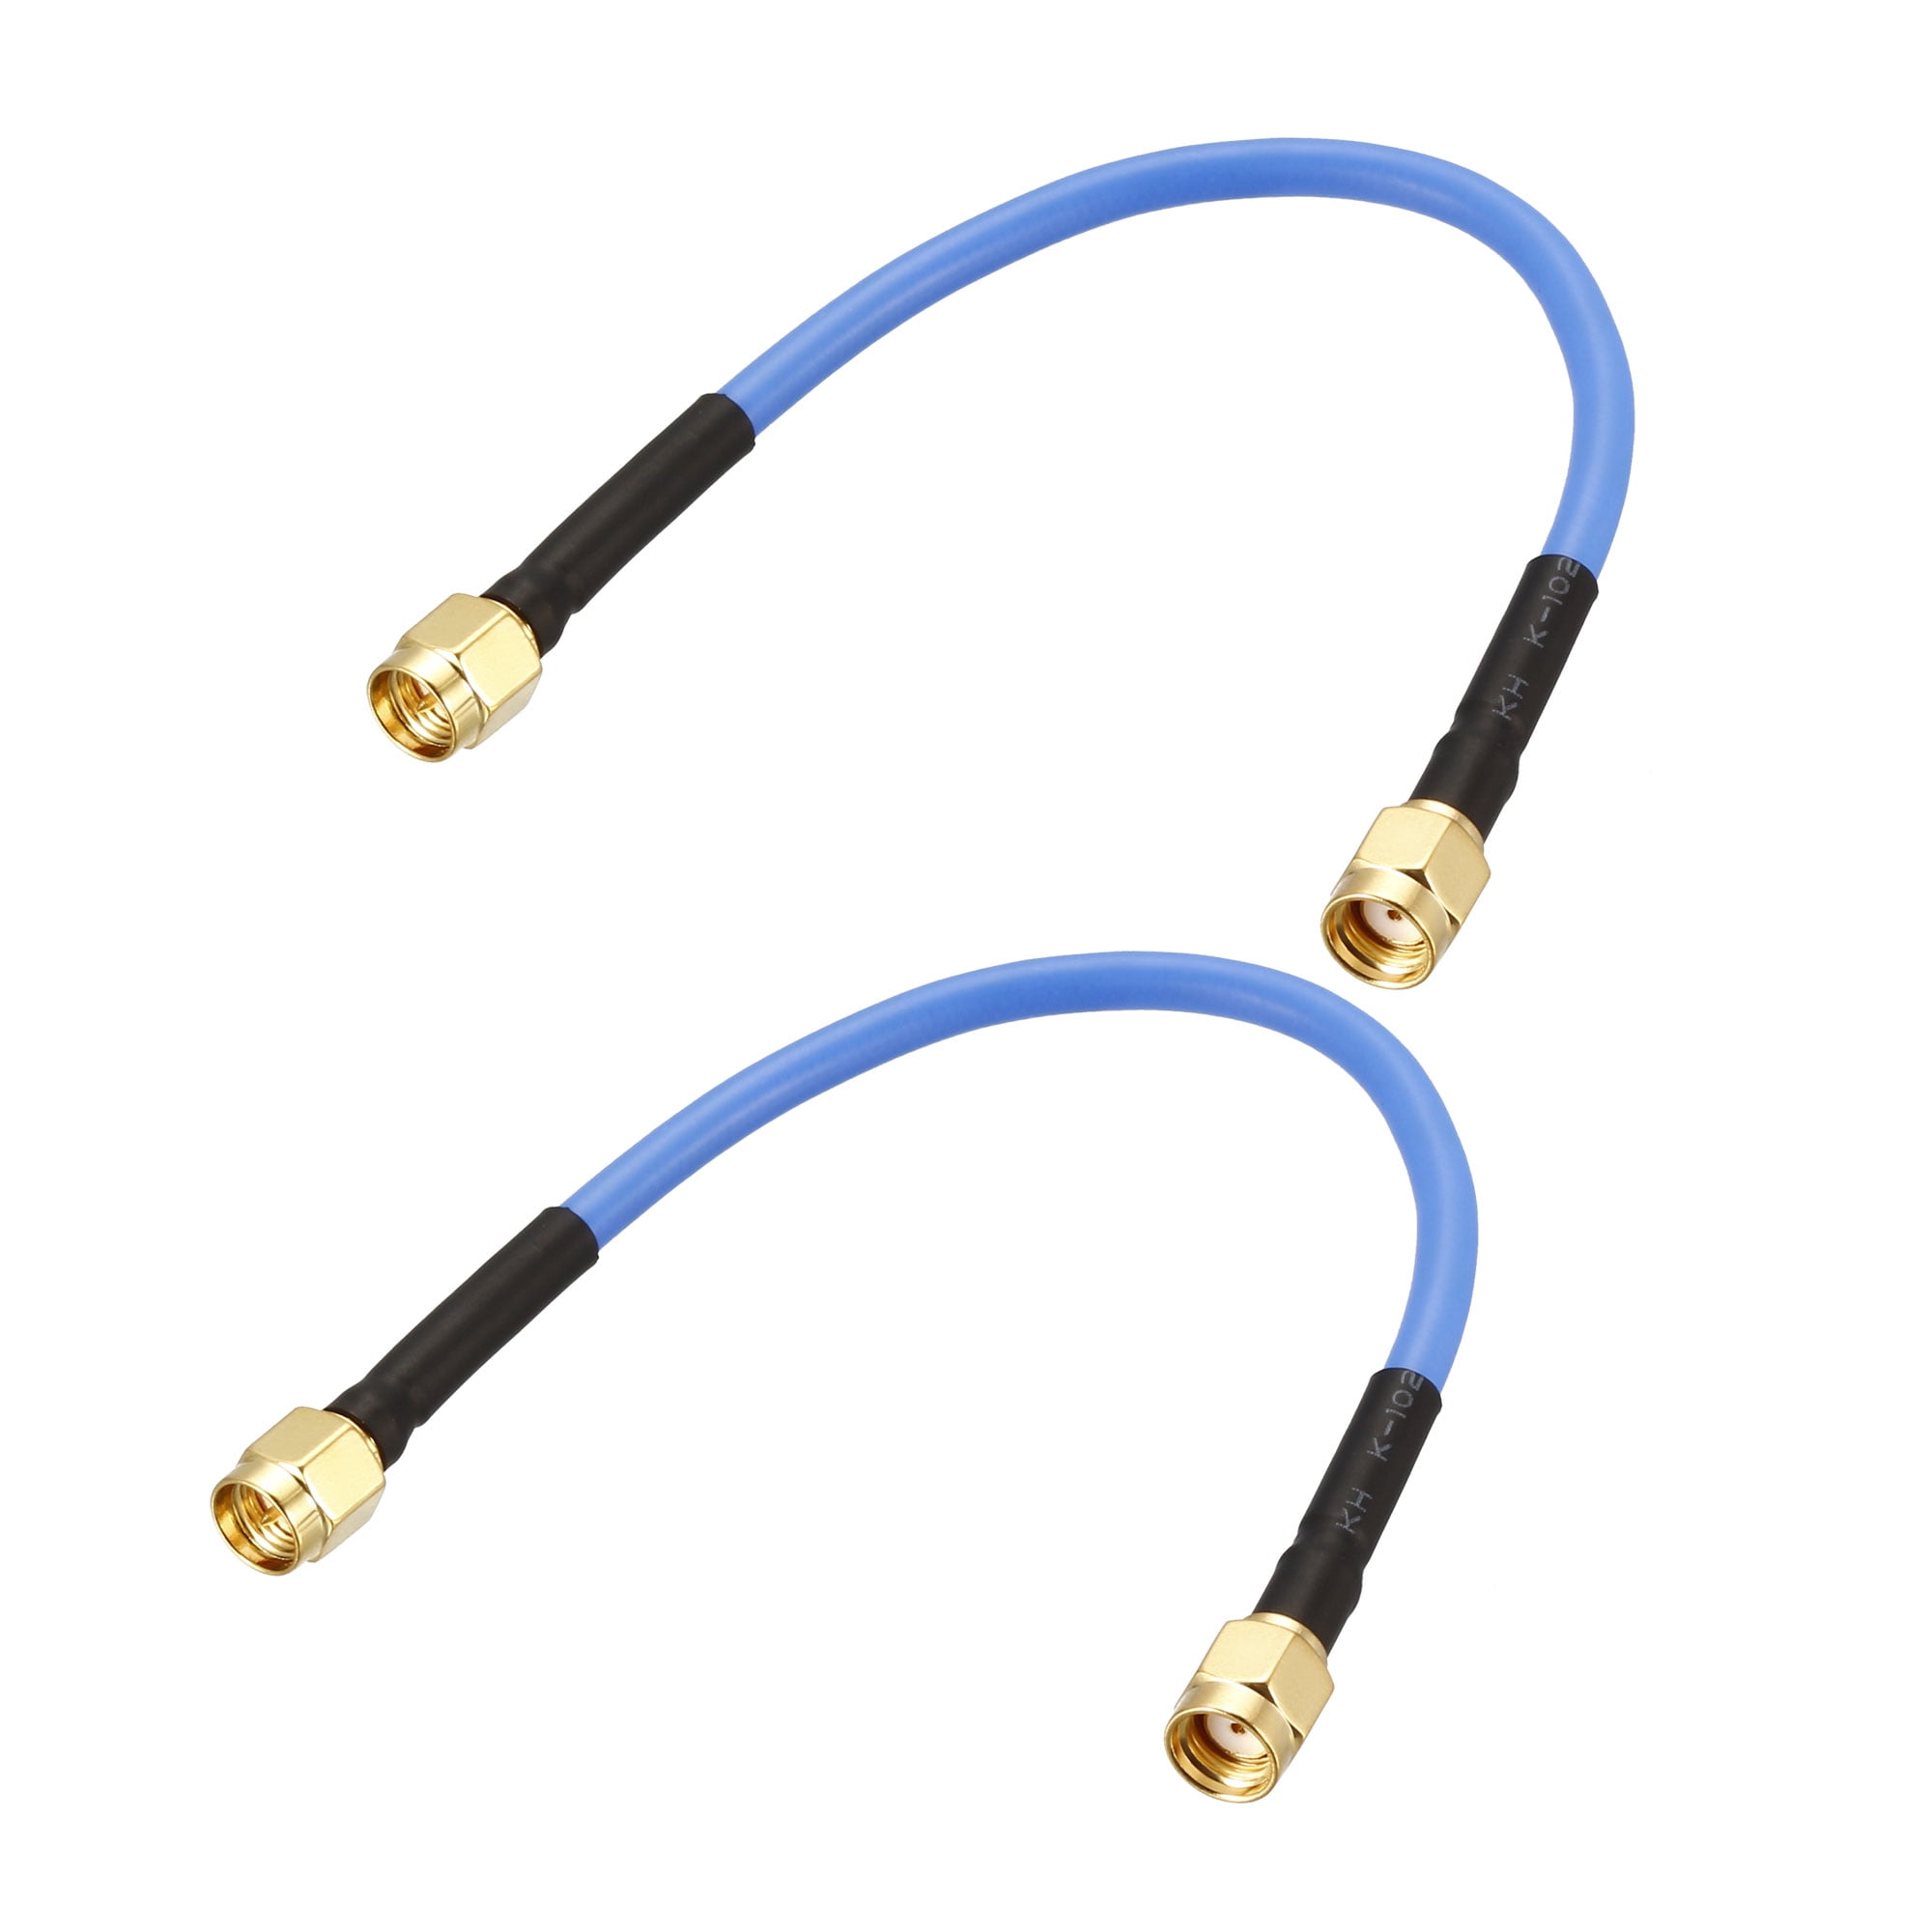 USA-CA RG402 Blue SMA MALE to SMA MALE ANGLE Coaxial RF Pigtail Cable 